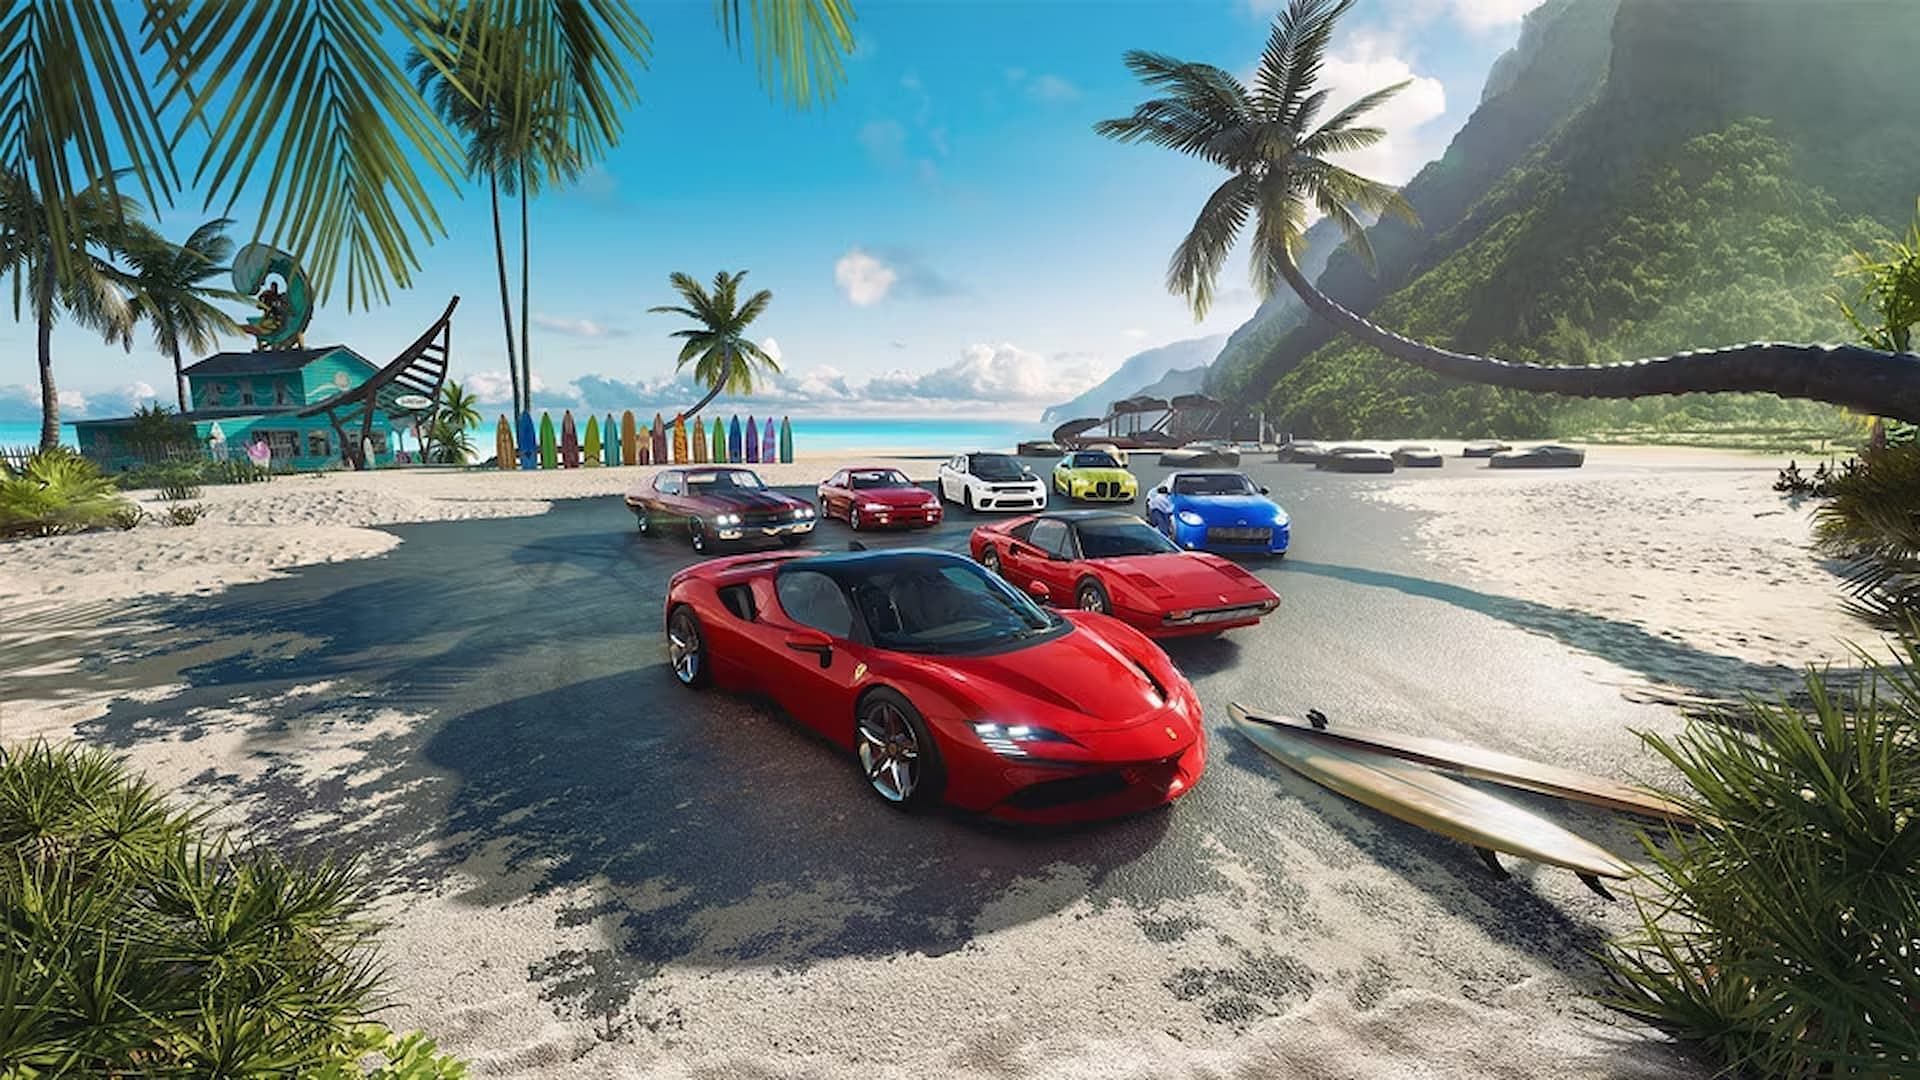 Why The Crew Motorfest's Map Isn't a Problem